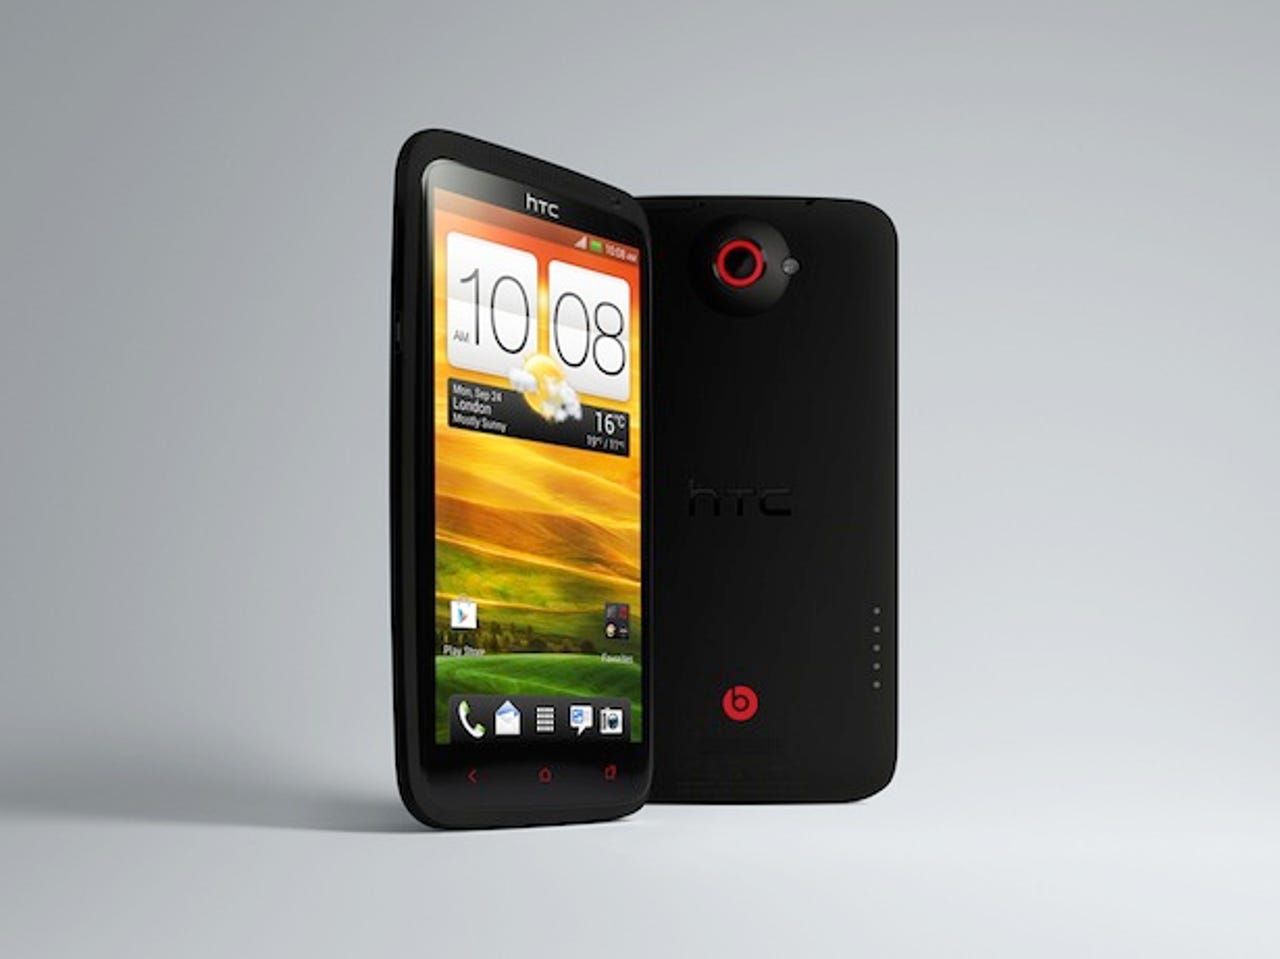 HTC announces One X+ with faster processor, more storage, and larger battery